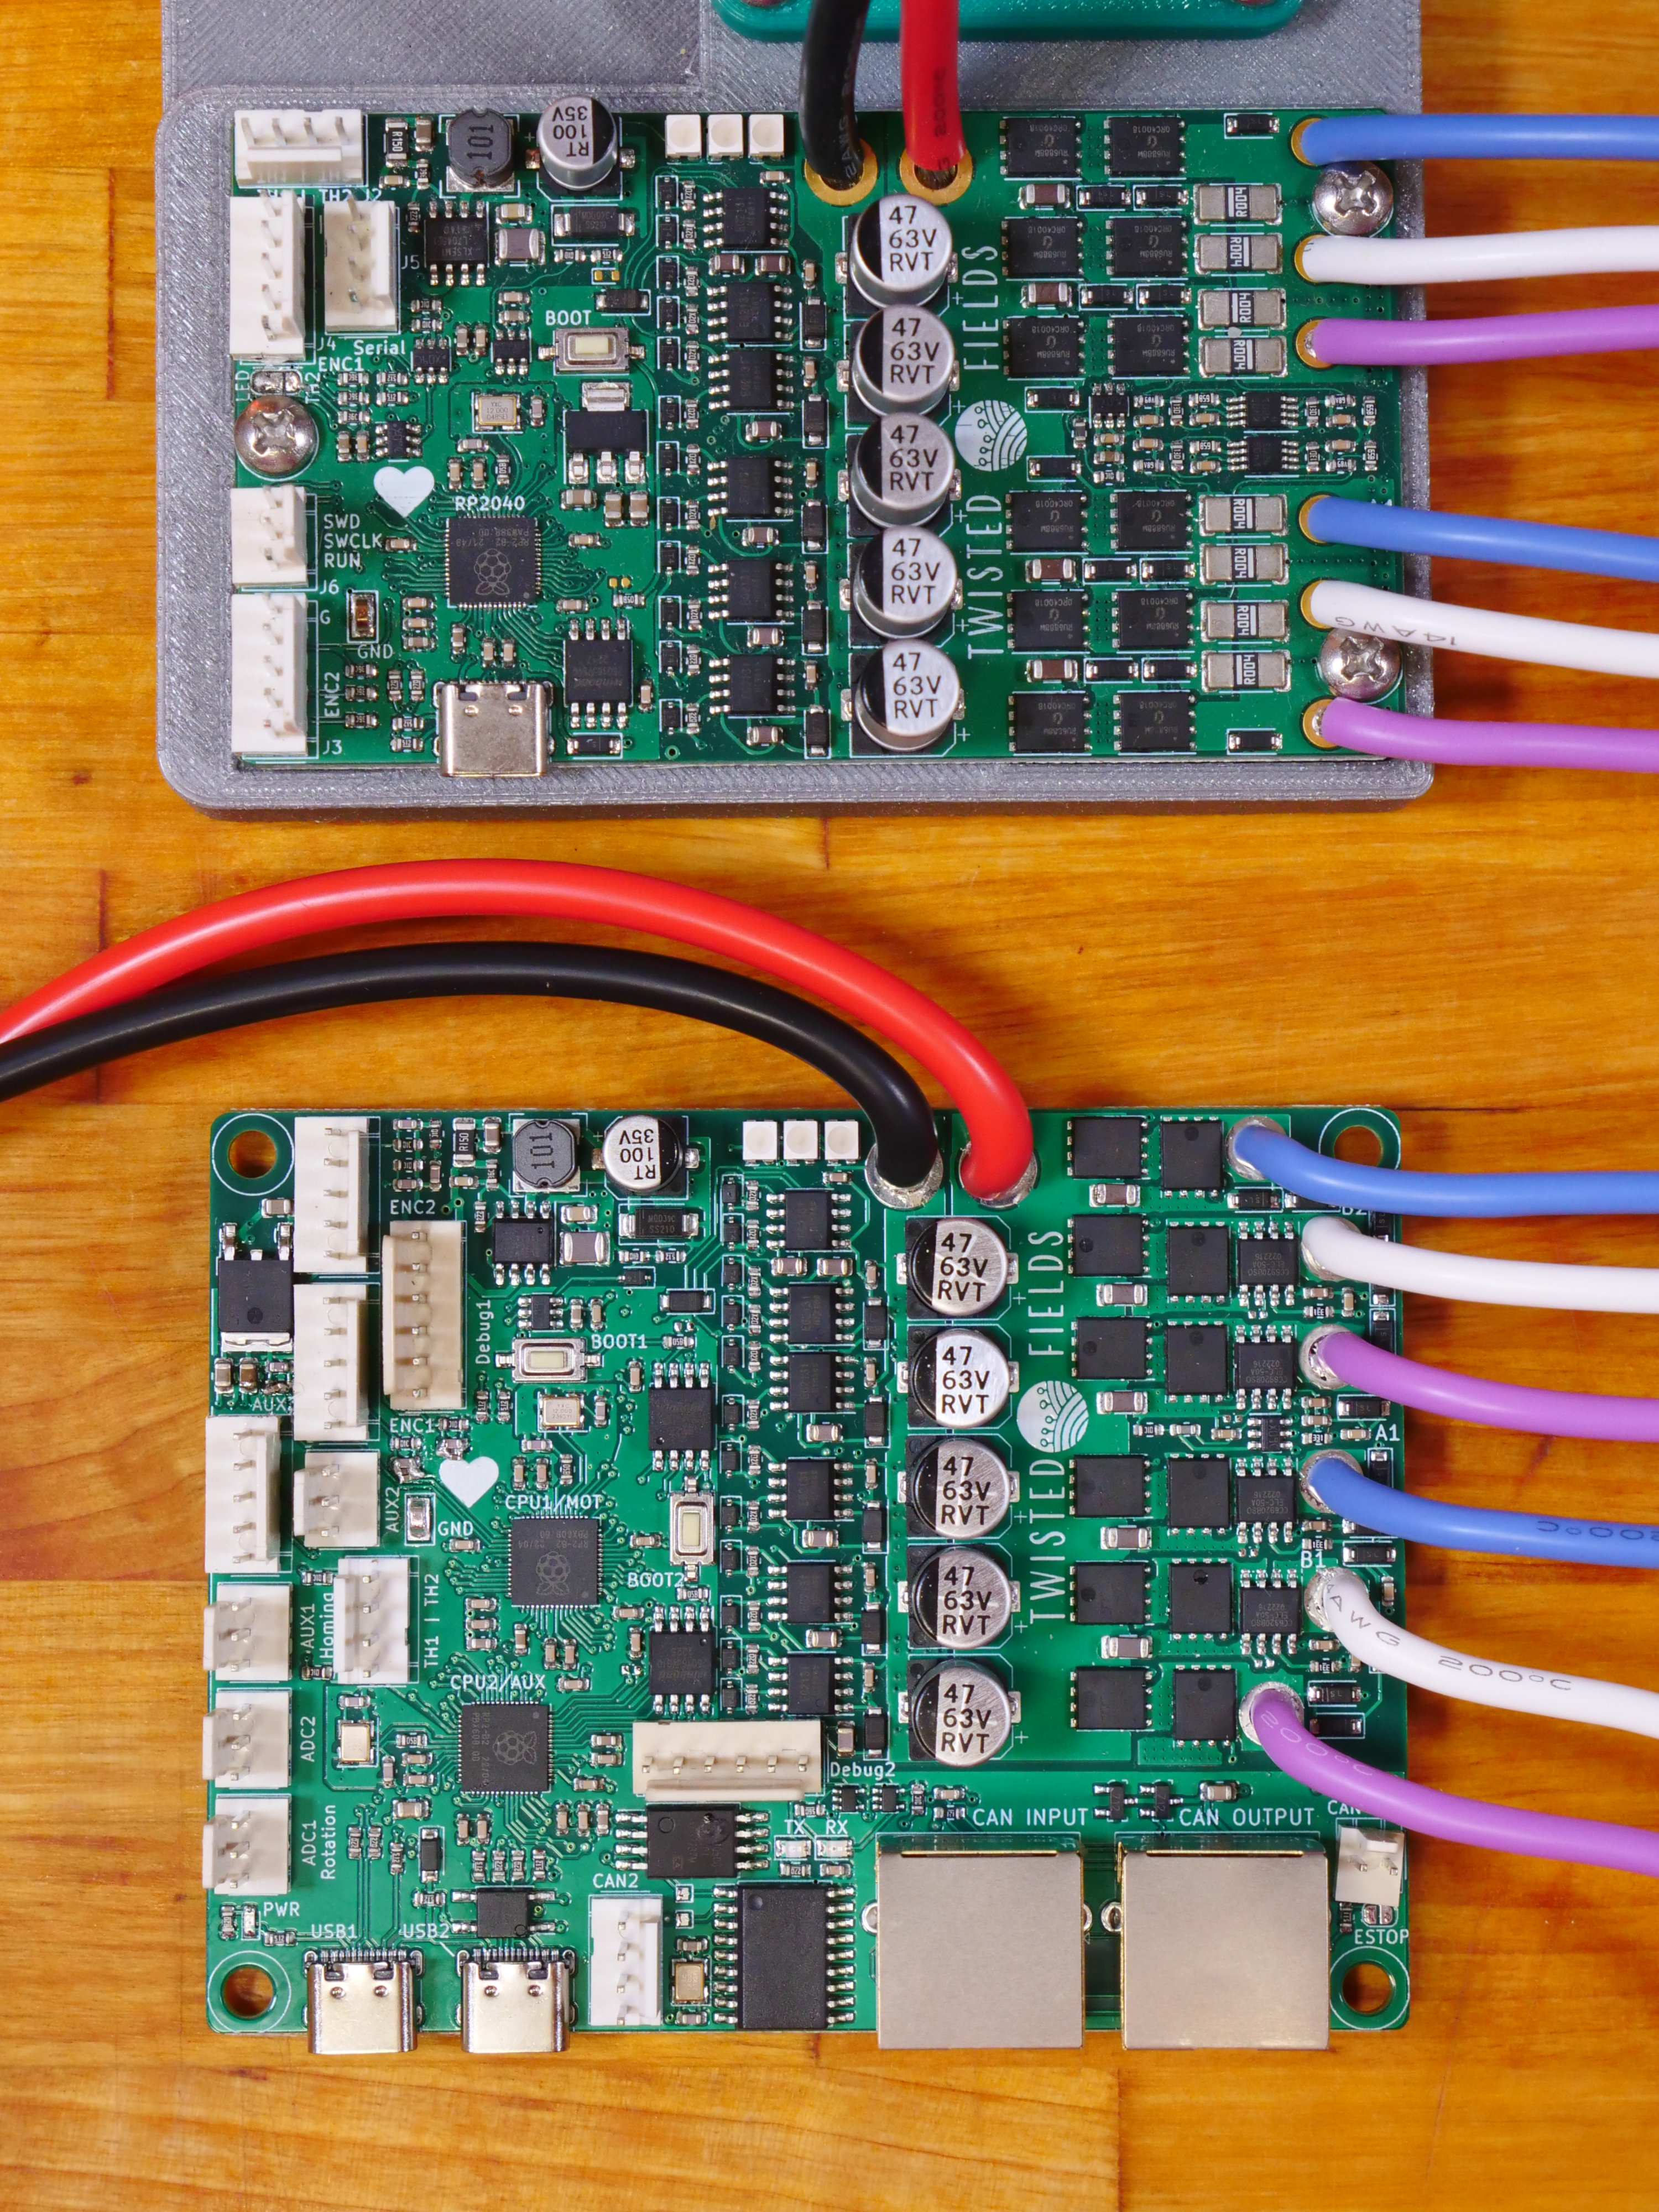 A photo of both PCB designs